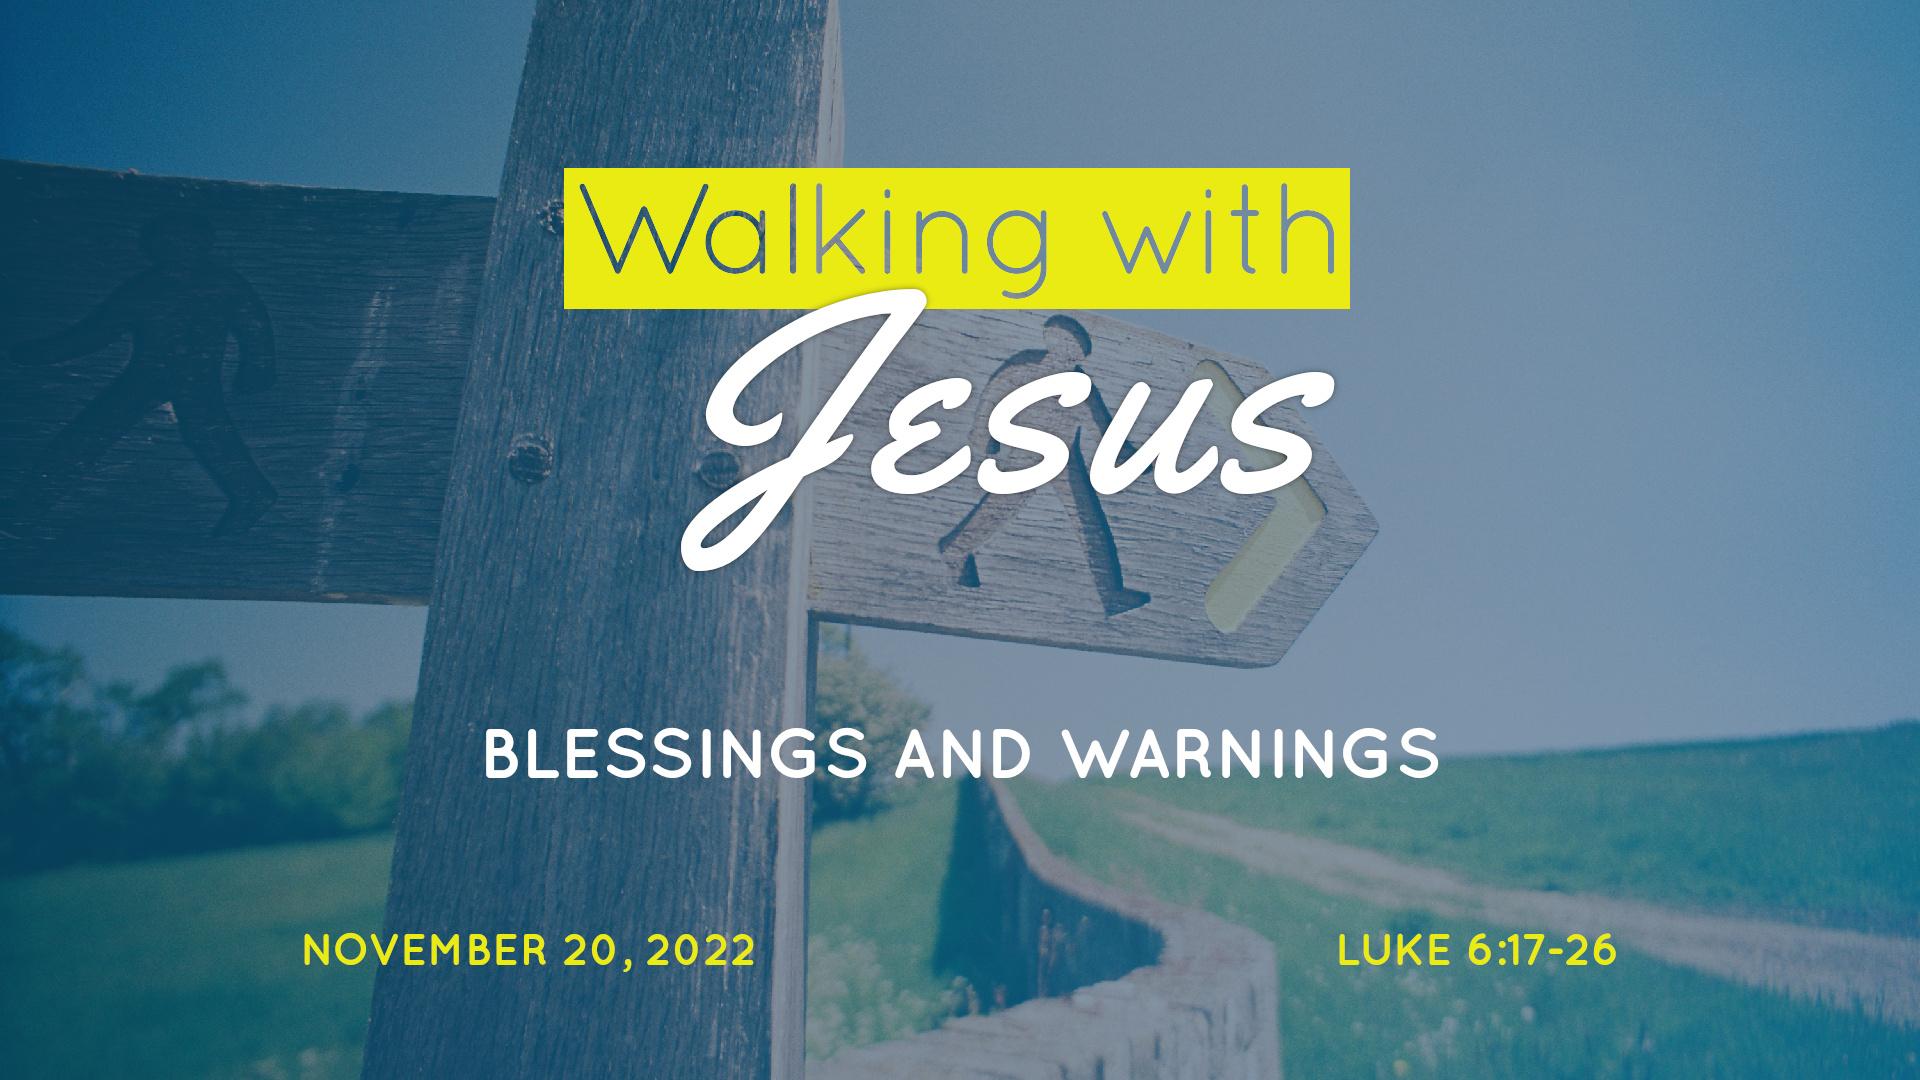 Walking with Jesus: Blessings and Warnings - sermon by Dr. John L. Rothra